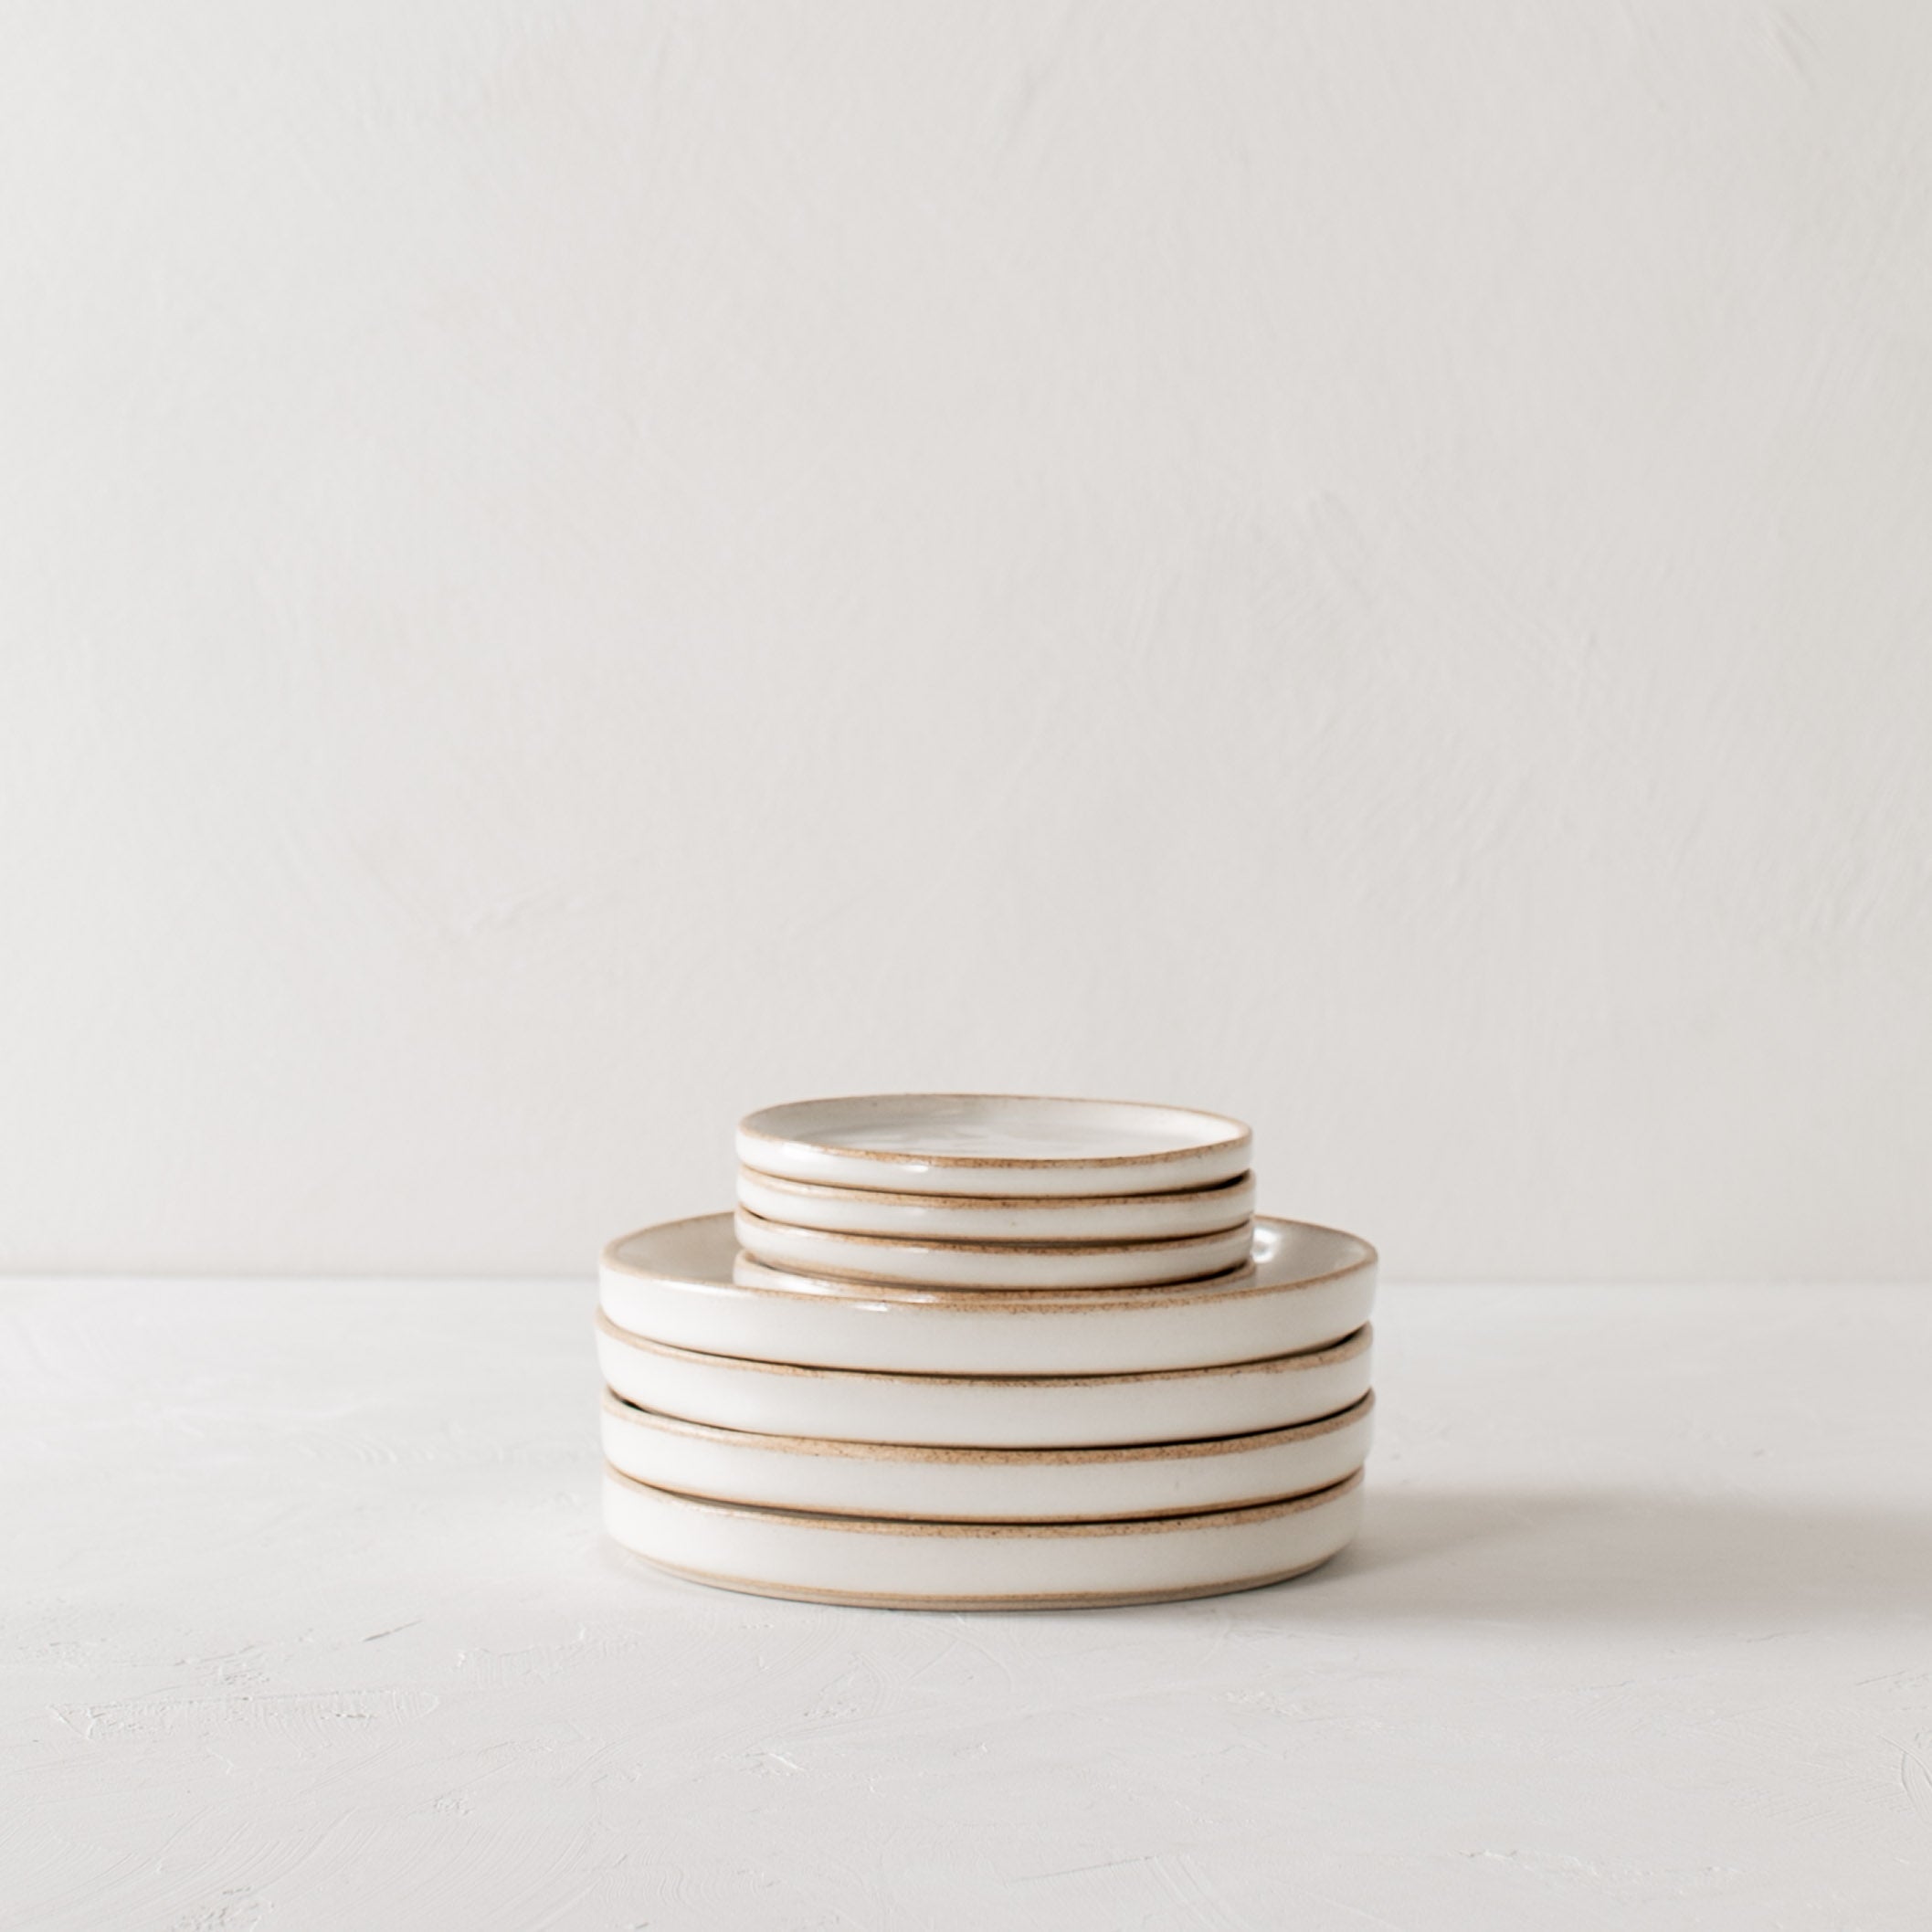 Stack of four ceramic 4 inch side dishes atop a stack of four 6 inch side. Dishes have exposed stoneware rims and bases. Handmade ceramic side dishes designed and sold by Convivial Production, Kansas City ceramics.